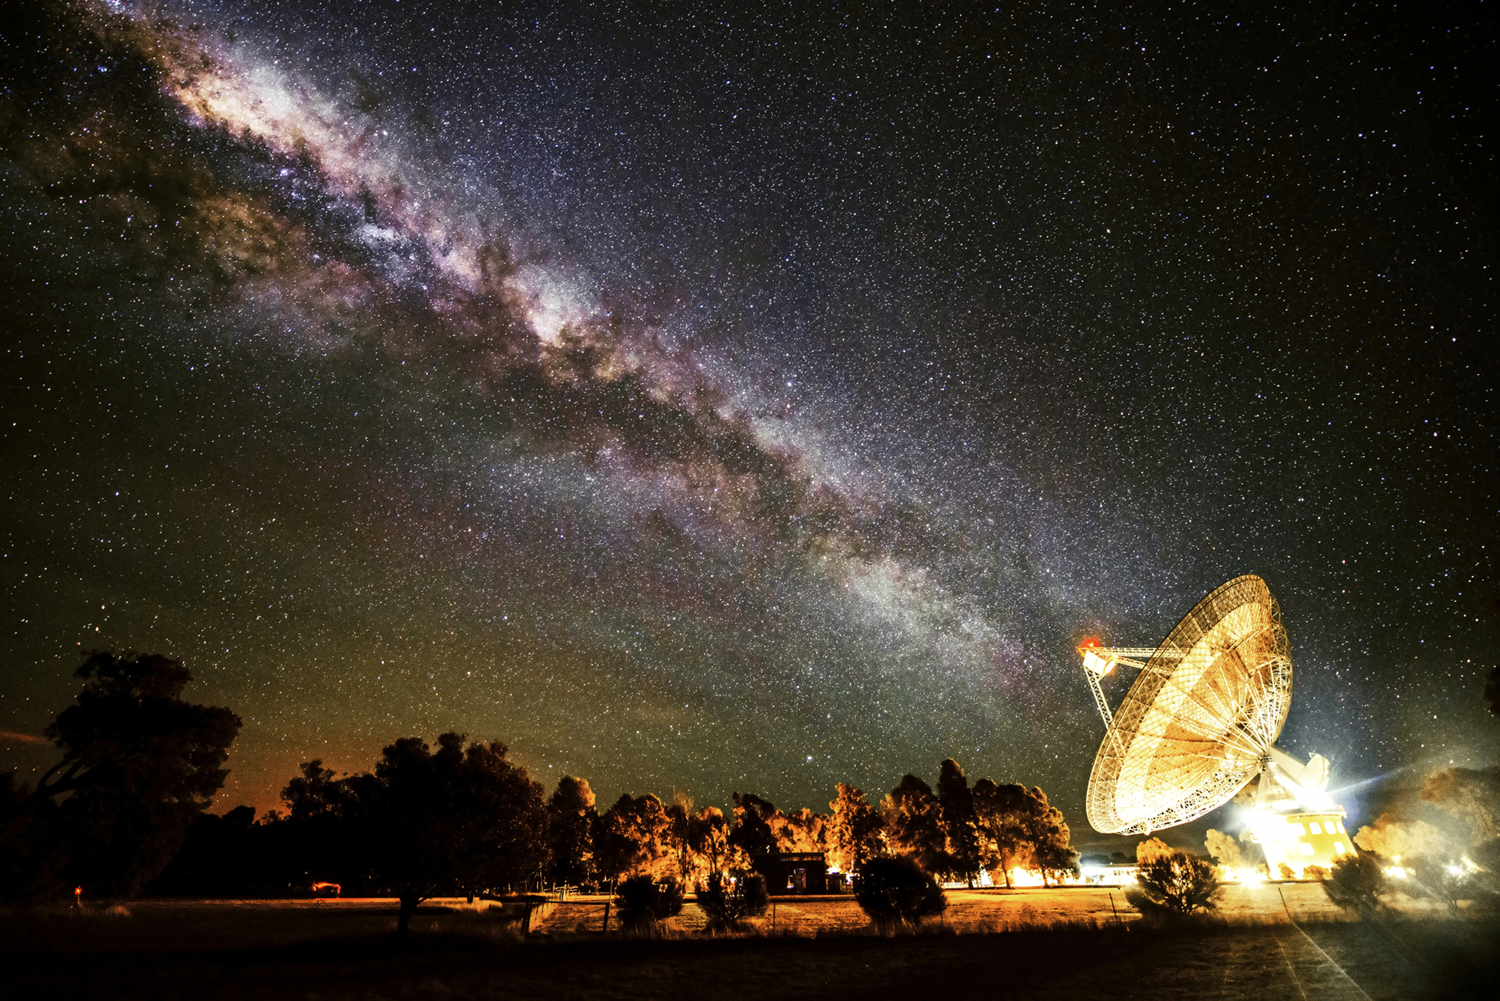 A dramatic night-time image of the 64-m Parkes radio telescope in Australia, under the splenor of the Milky Way. The iconic telescope has detected during the last decade a total of 10 mysterious cosmic radio flashes, known as 'fast radio bursts'. A new study now suggests that these astrophysical sources exhibit a surprising and unexpected mathematical pattern, which, if proven true,  could provide great insights on the nature of our Universe. Image Credit: Wayne England/CSIRO